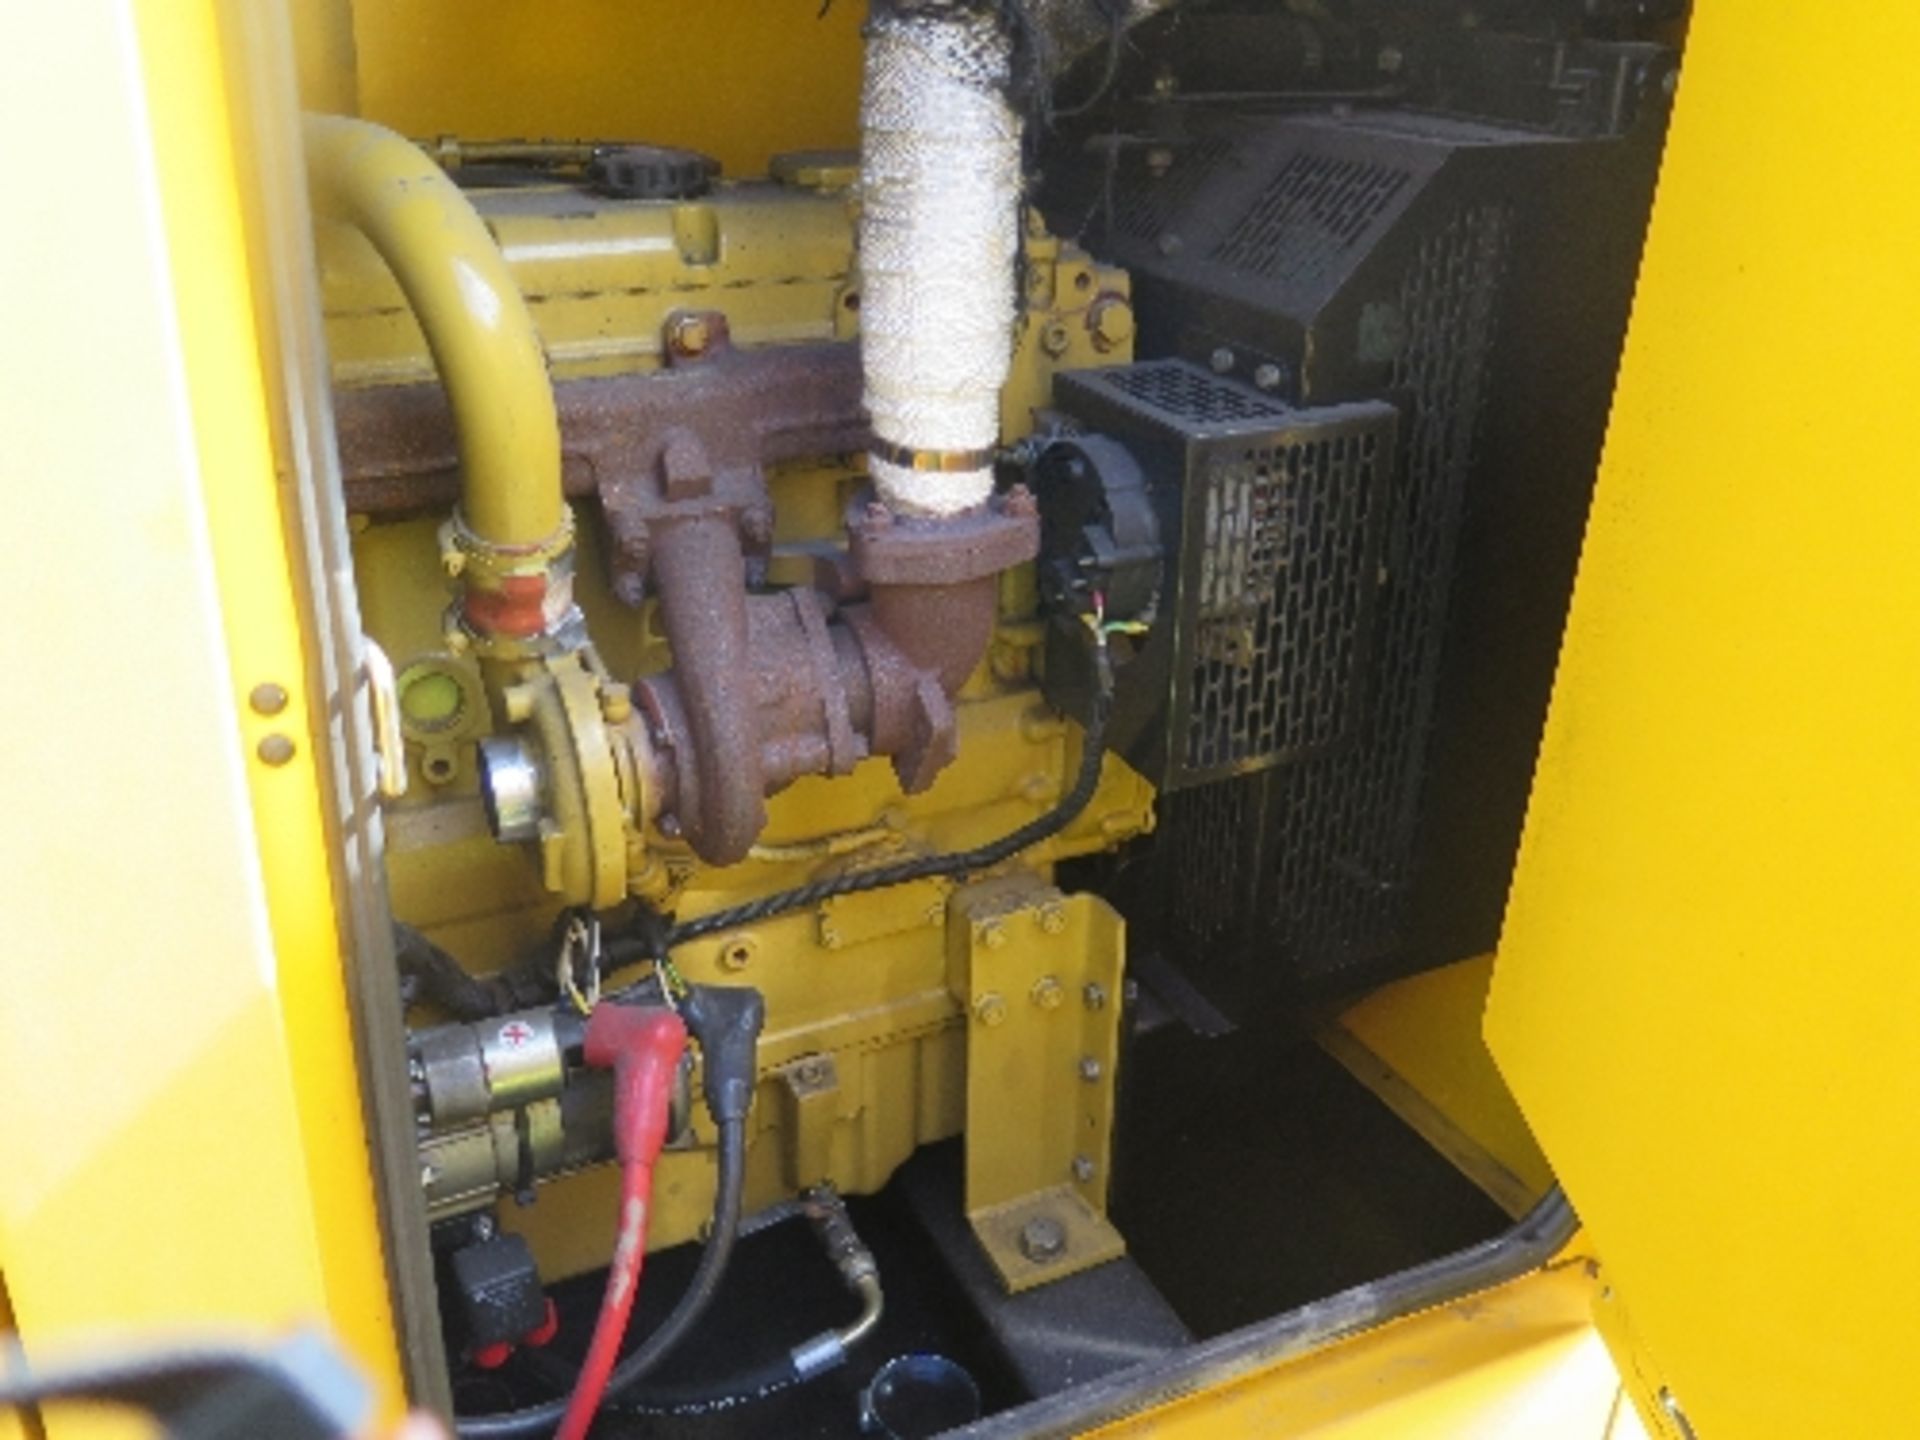 Caterpillar XQE80 generator 130887 hrs 157810
PERKINS - RUNS AND MAKES POWER
CYLINDER HEAD FUEL - Image 4 of 6